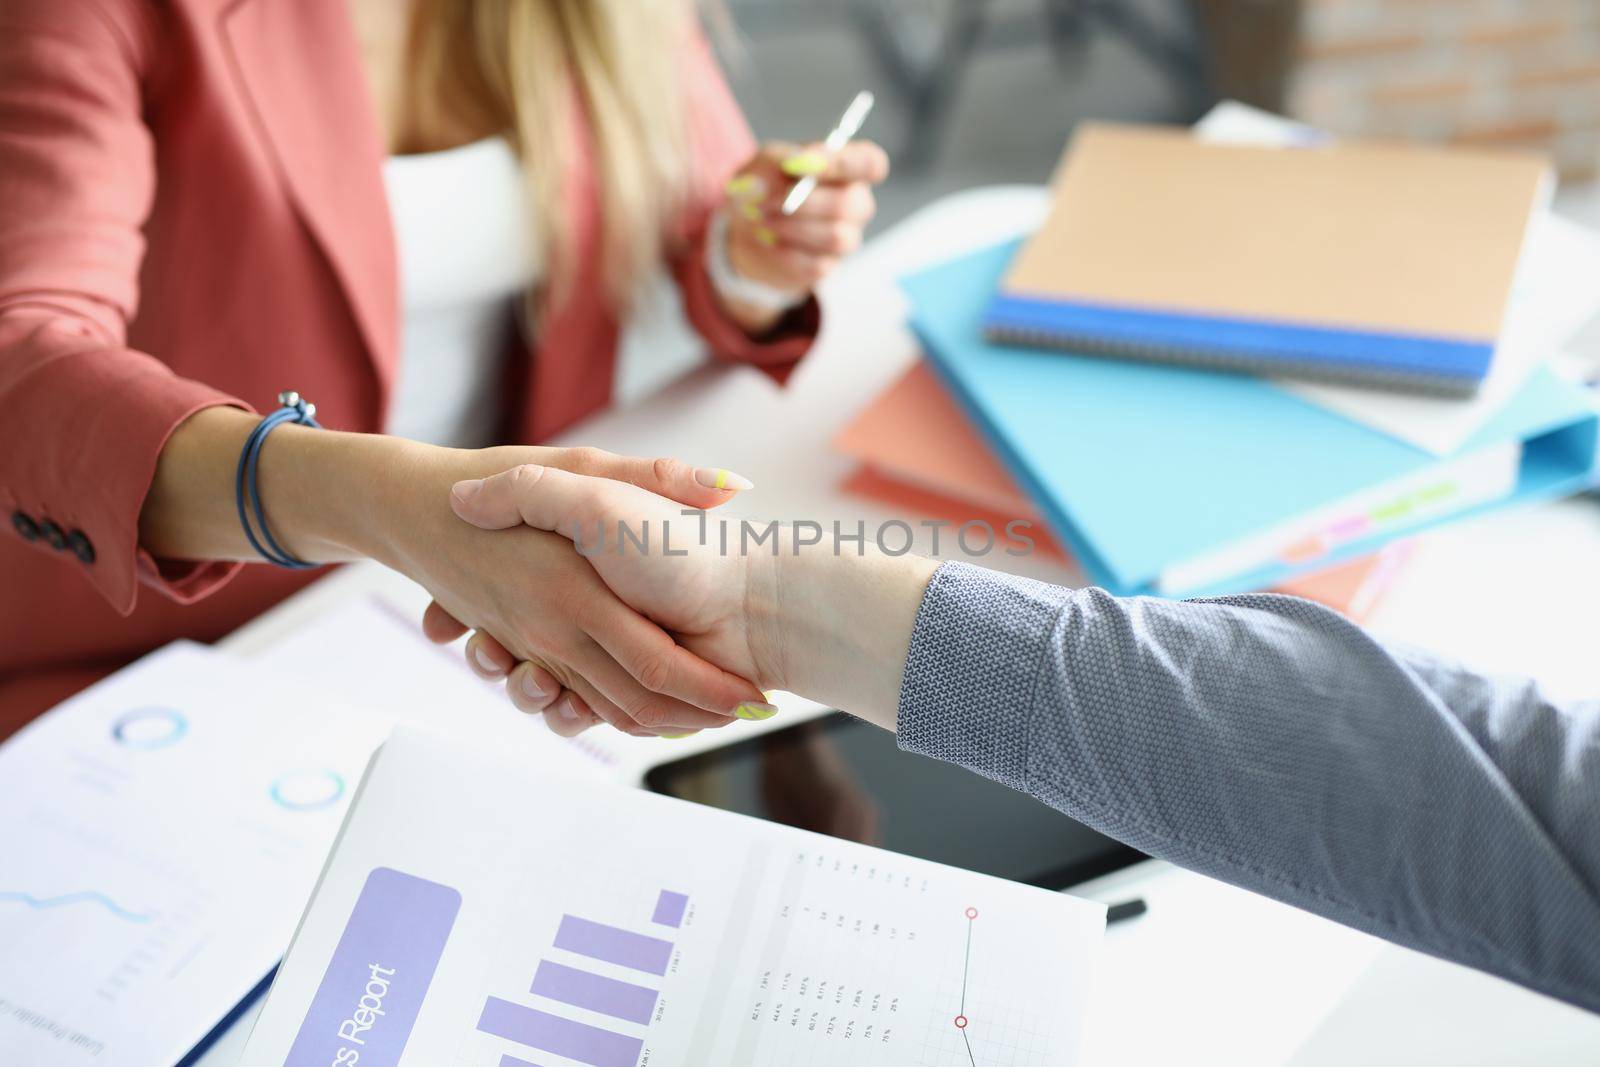 Close-up of partners shake hands over business papers on workplace in office. Biz partners perform friendly gesture after agreement. Deal, contract concept